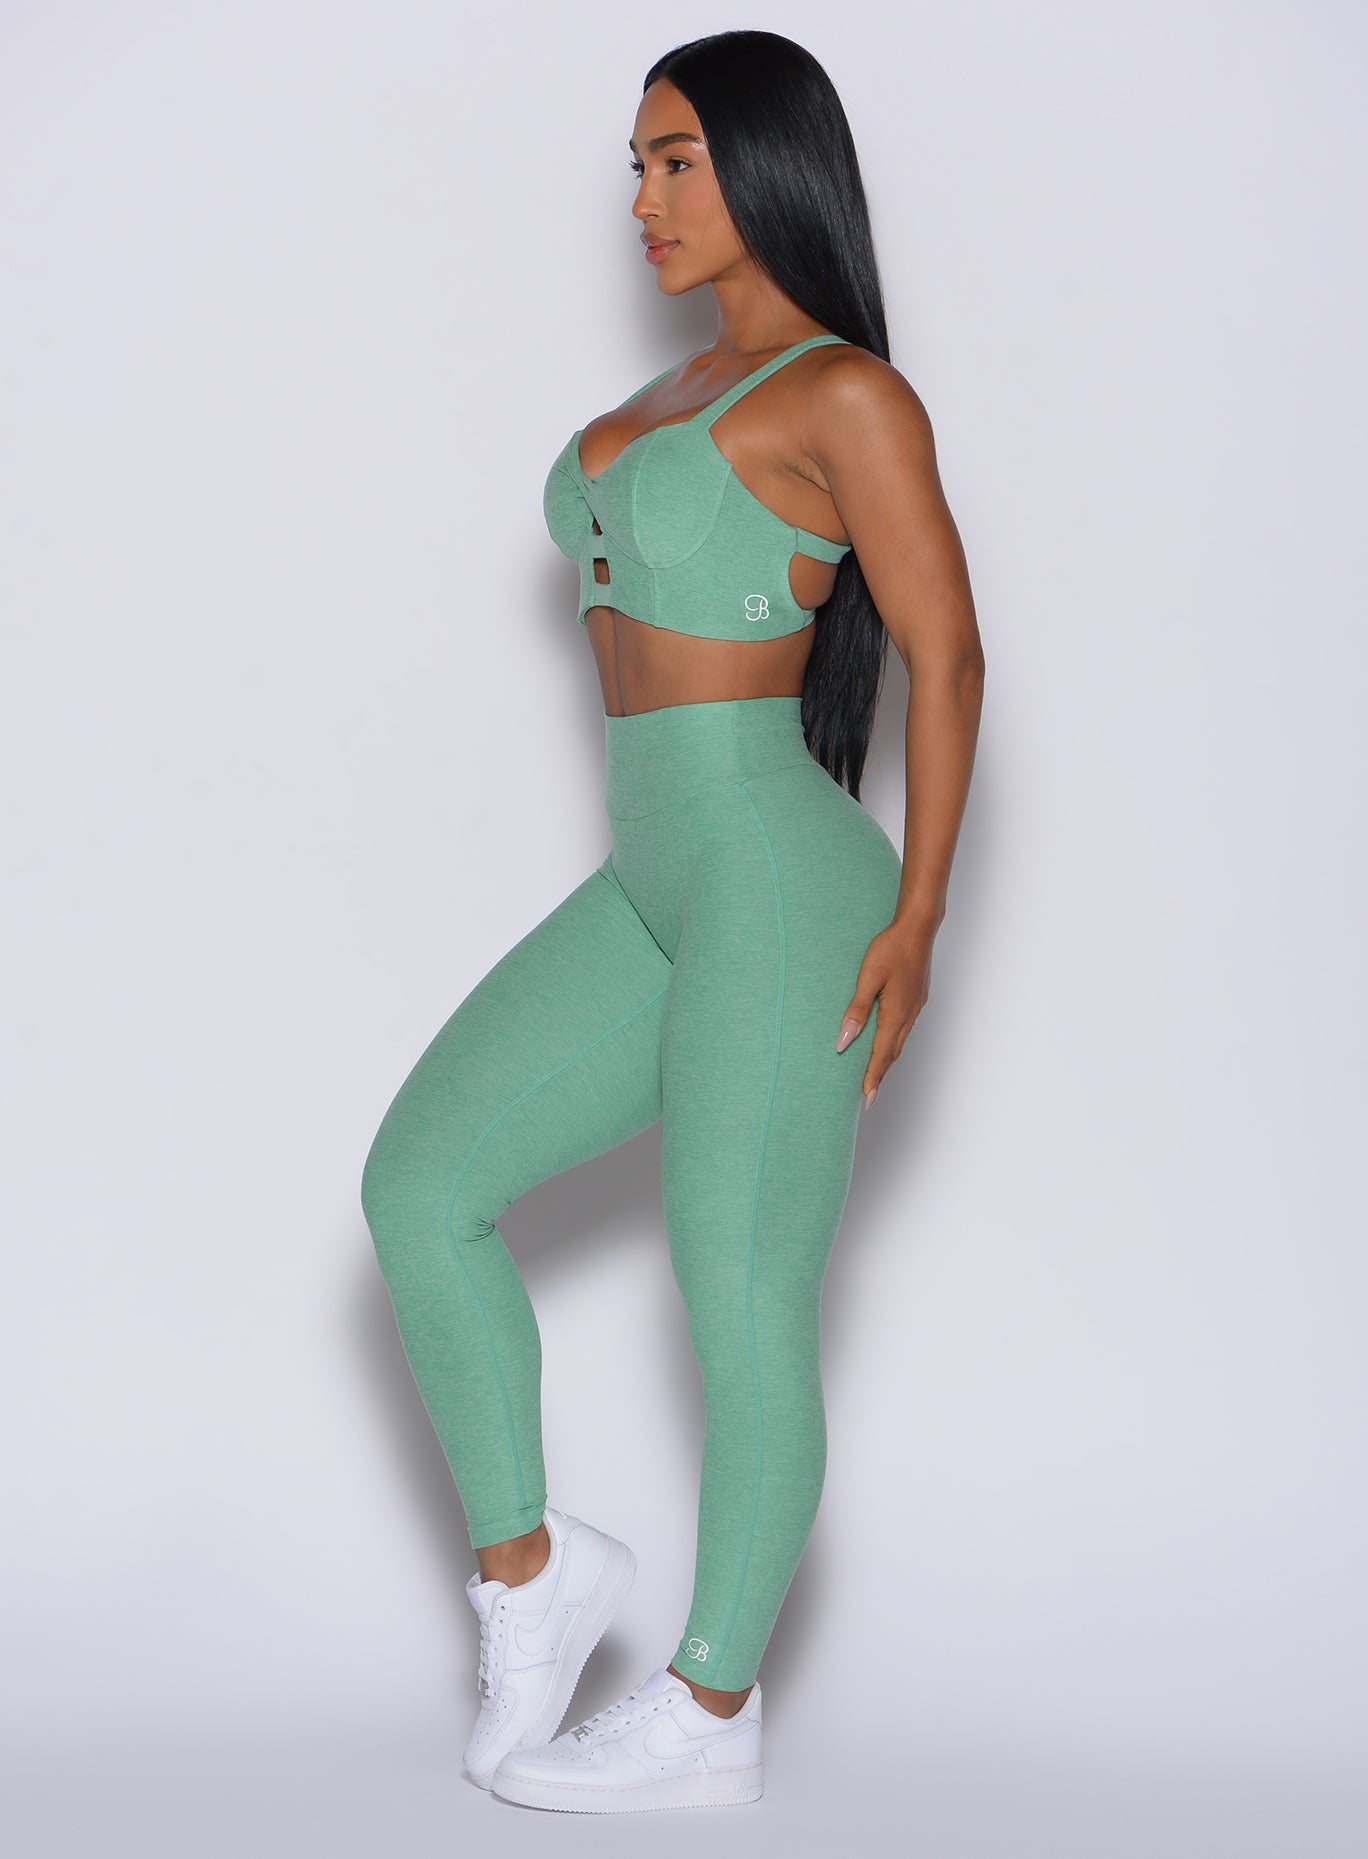 Left side view of model wearing our Movement Leggings in Sage color and a matching Sports Bra